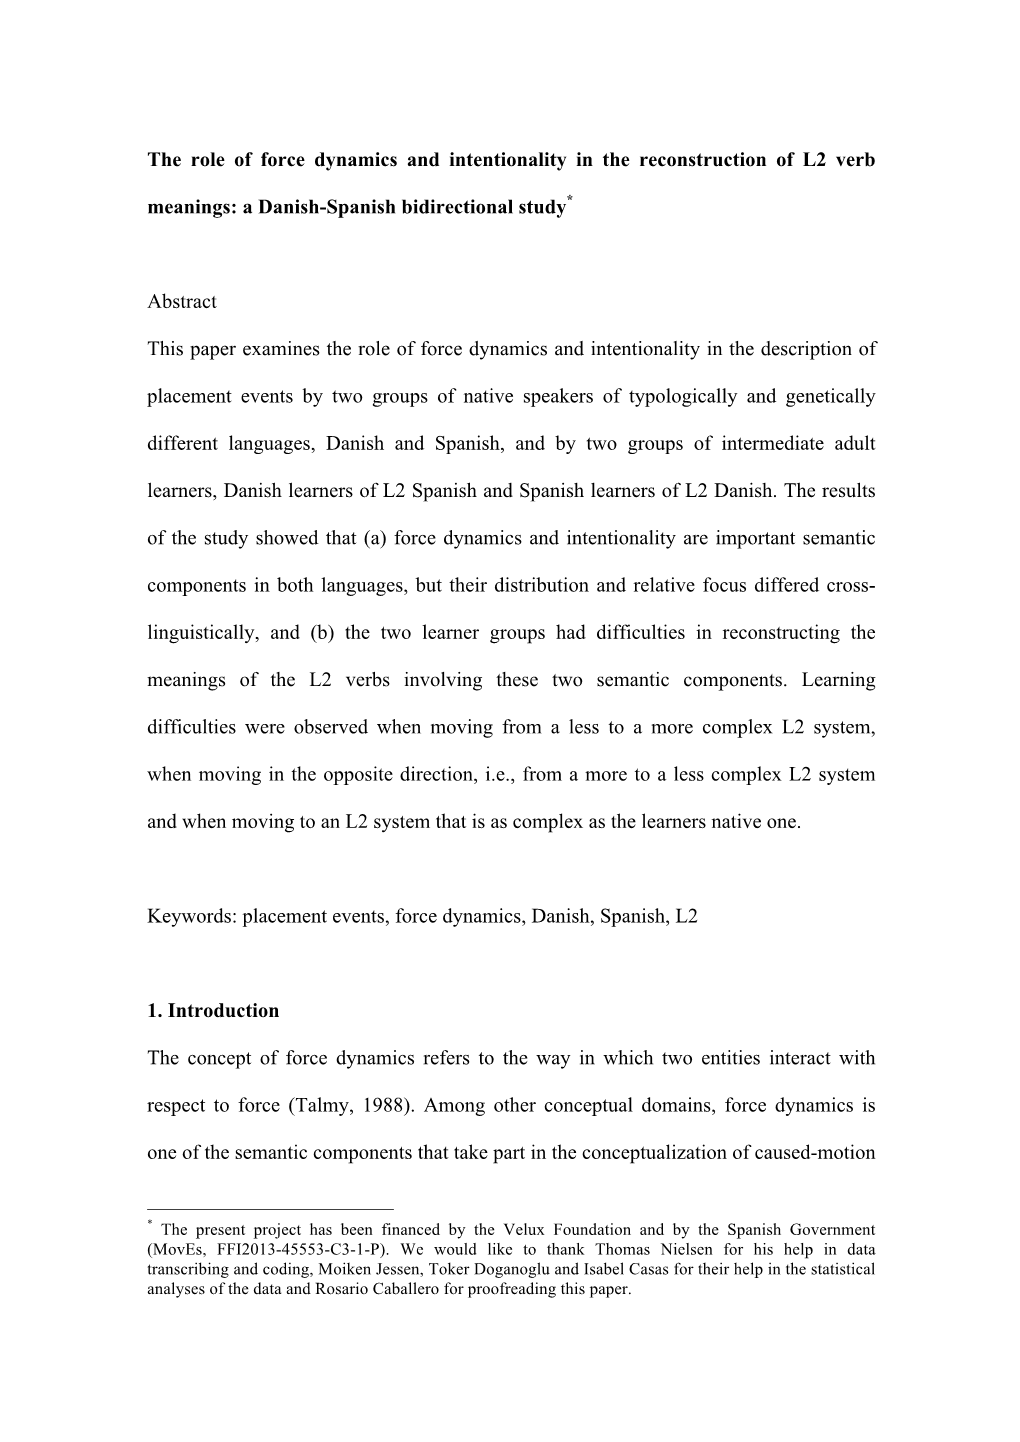 The Role of Force Dynamics and Intentionality in the Reconstruction of L2 Verb Meanings: a Danish-Spanish Bidirectional Study*